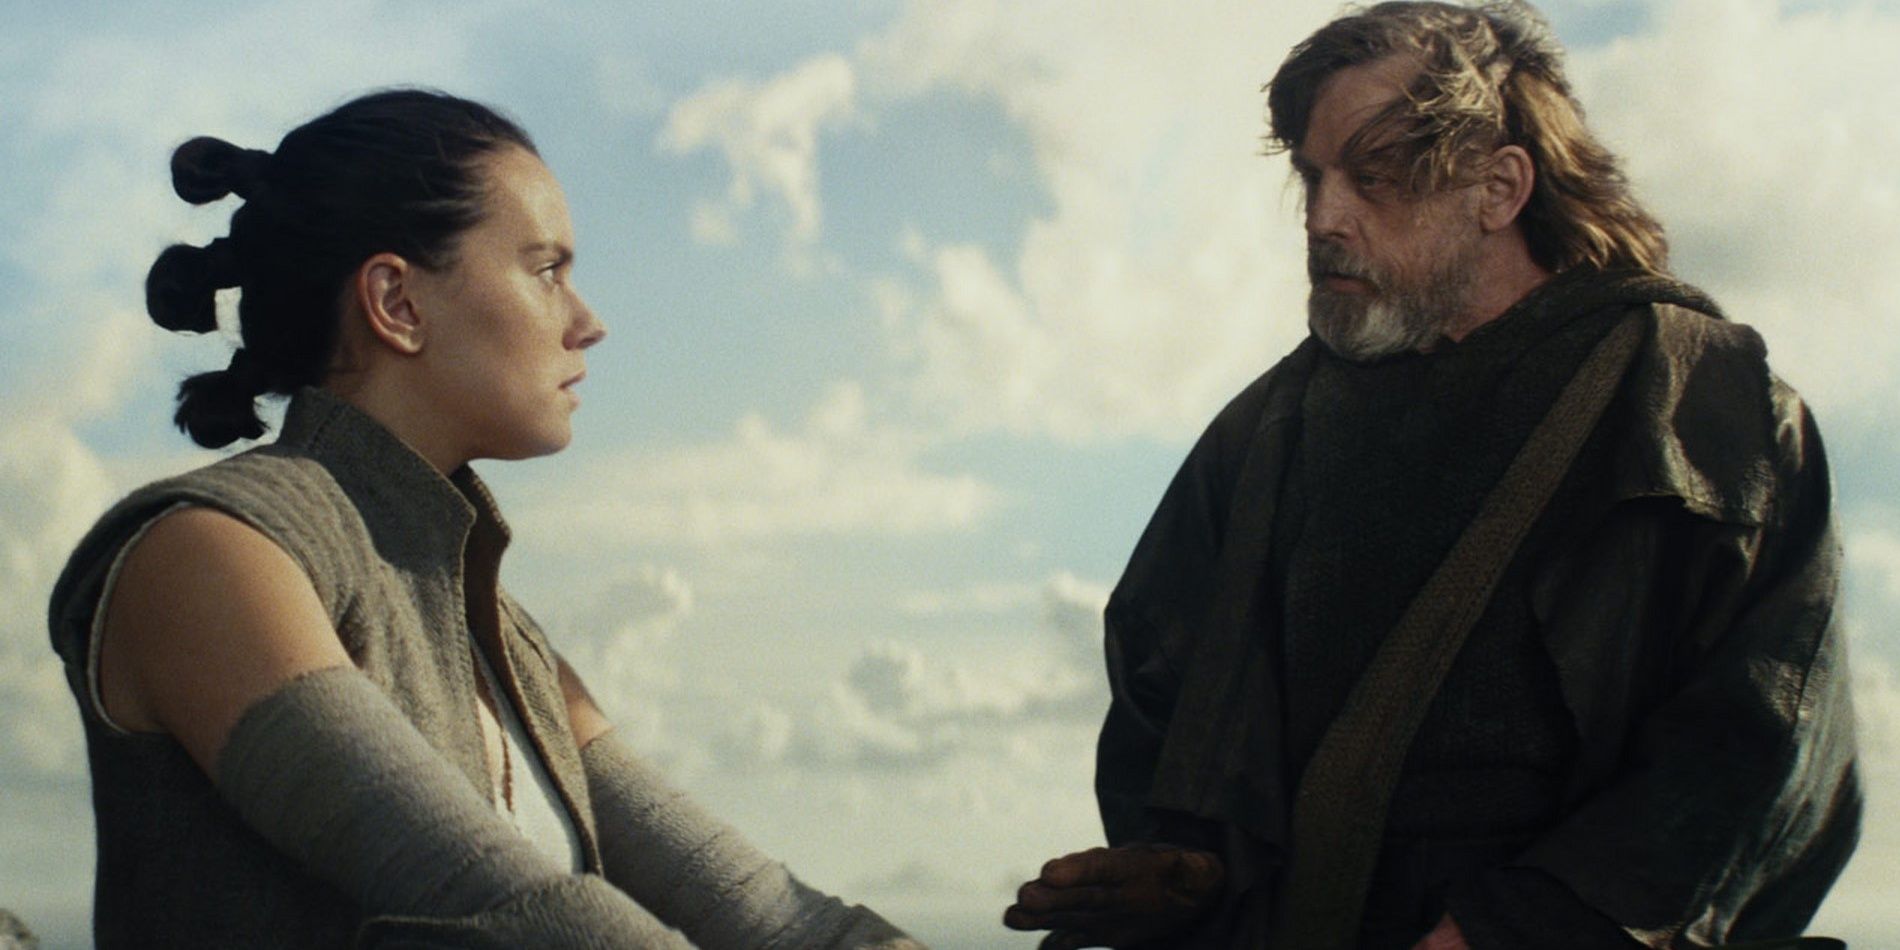 Rise Of Skywalker 5 Reasons We Loved Where Rey Came From (& 5 They Should Have Kept Her As Nobody)